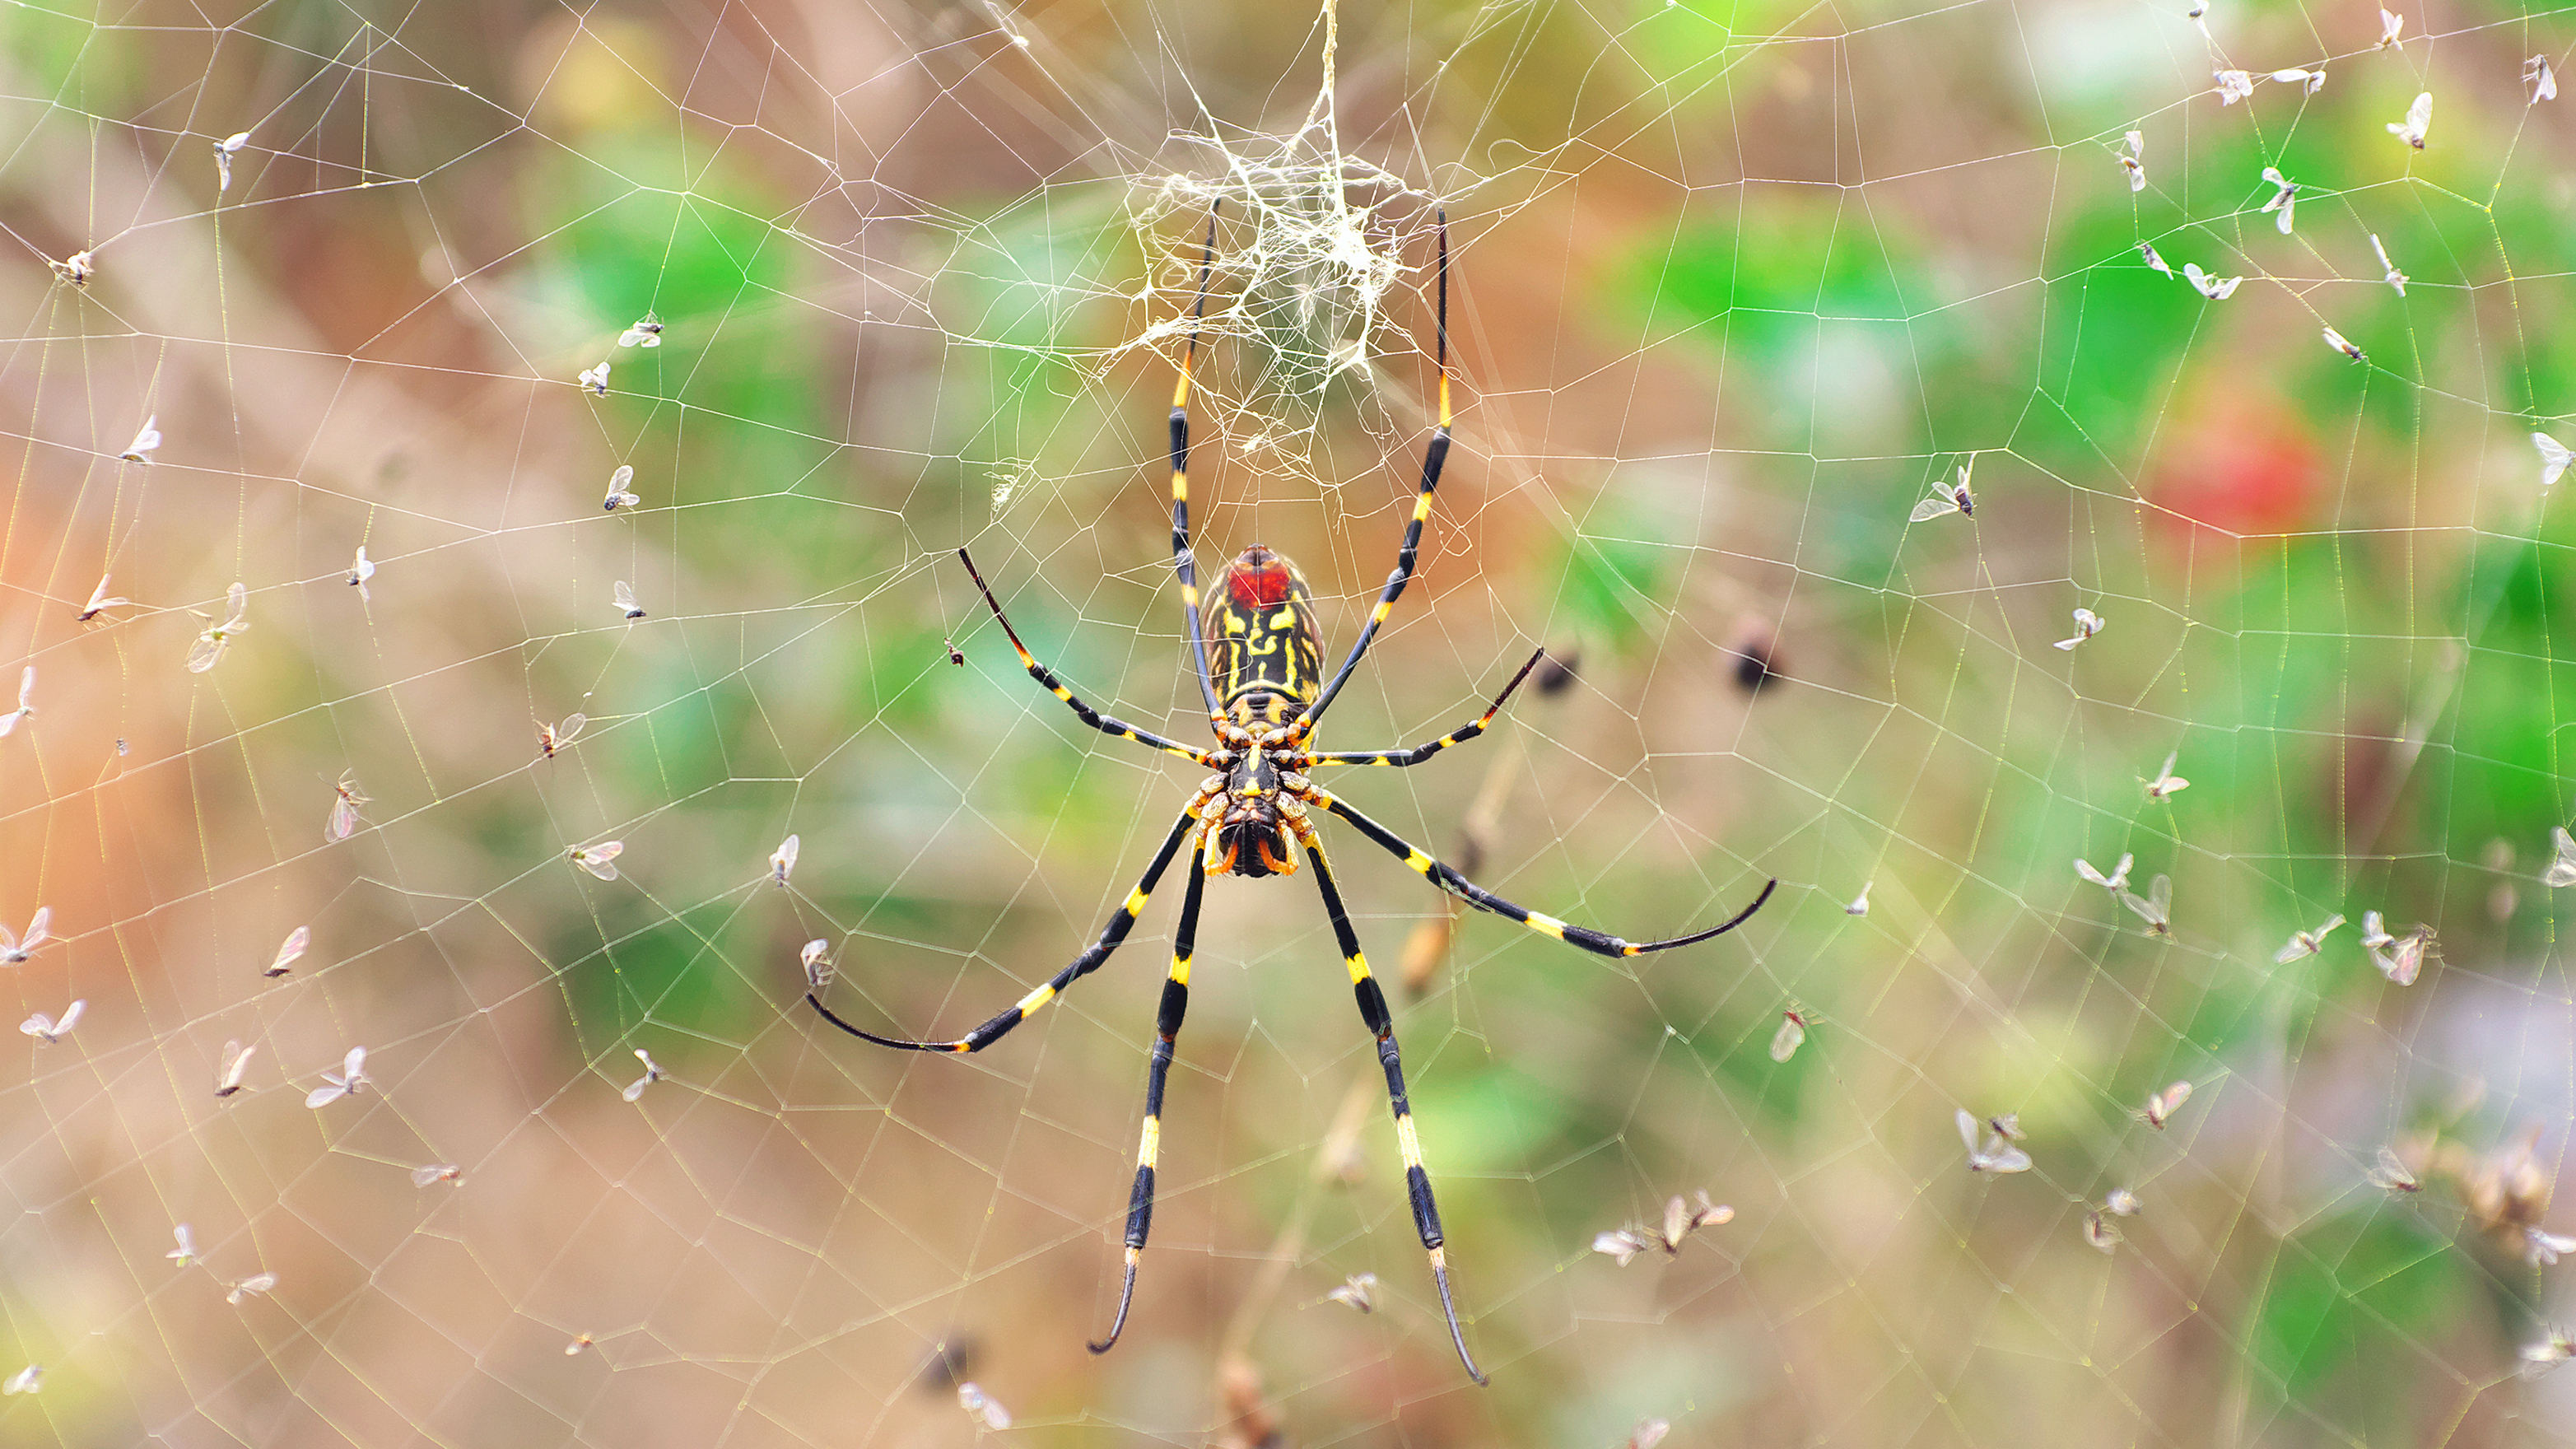 A Joro spider in its web, surrounded by trapped flies